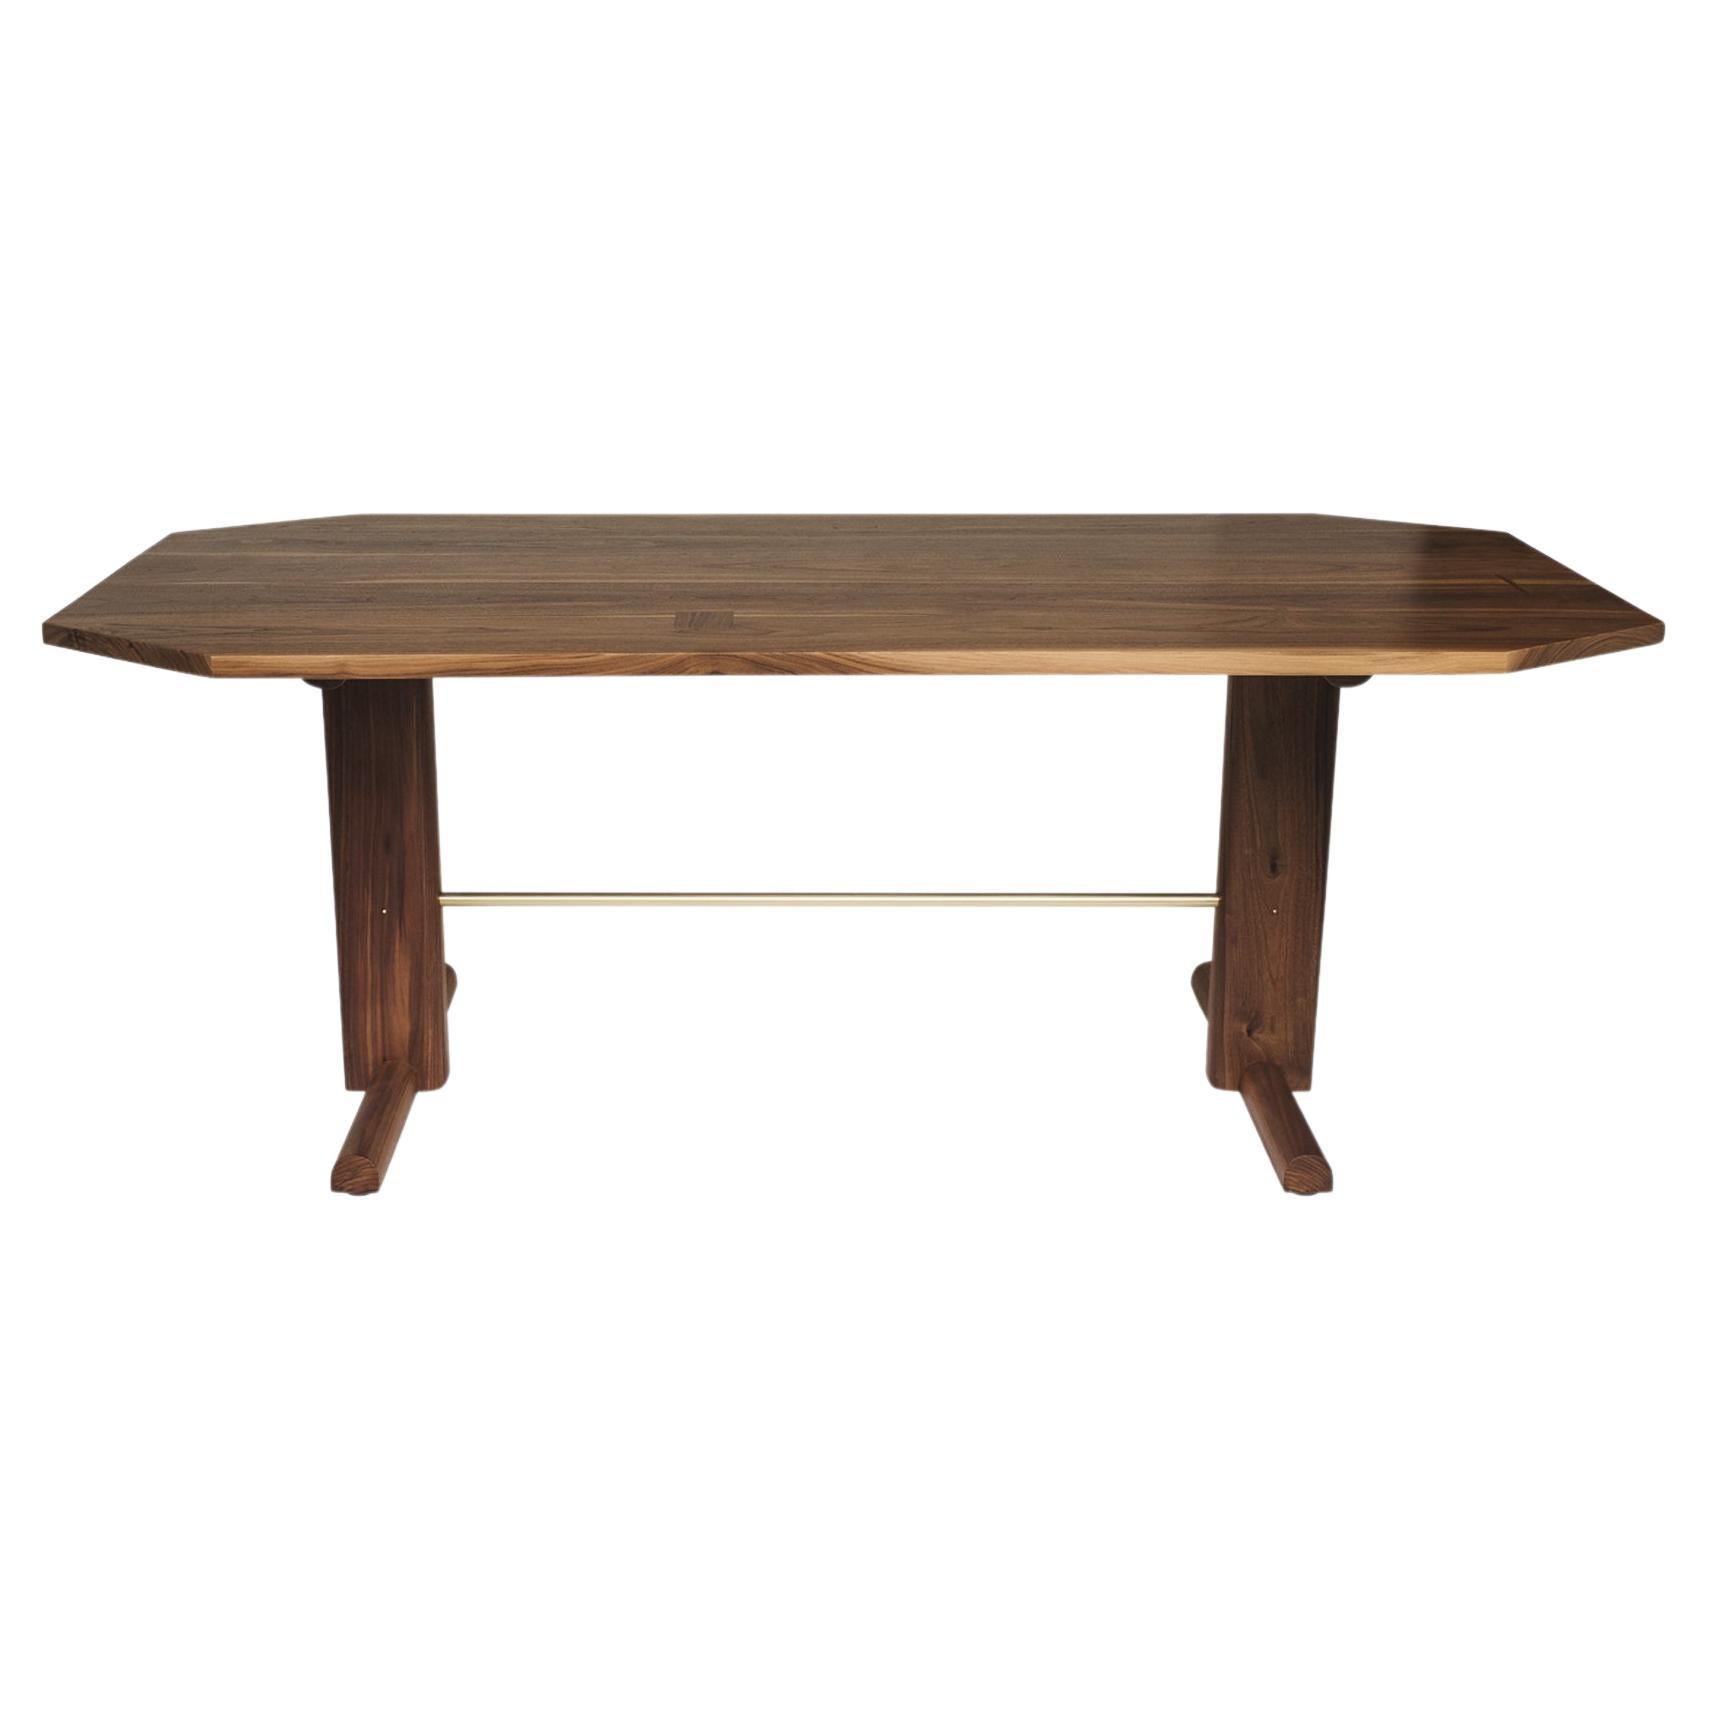 Clipped Corner BRIG Dining Table in Walnut For Sale